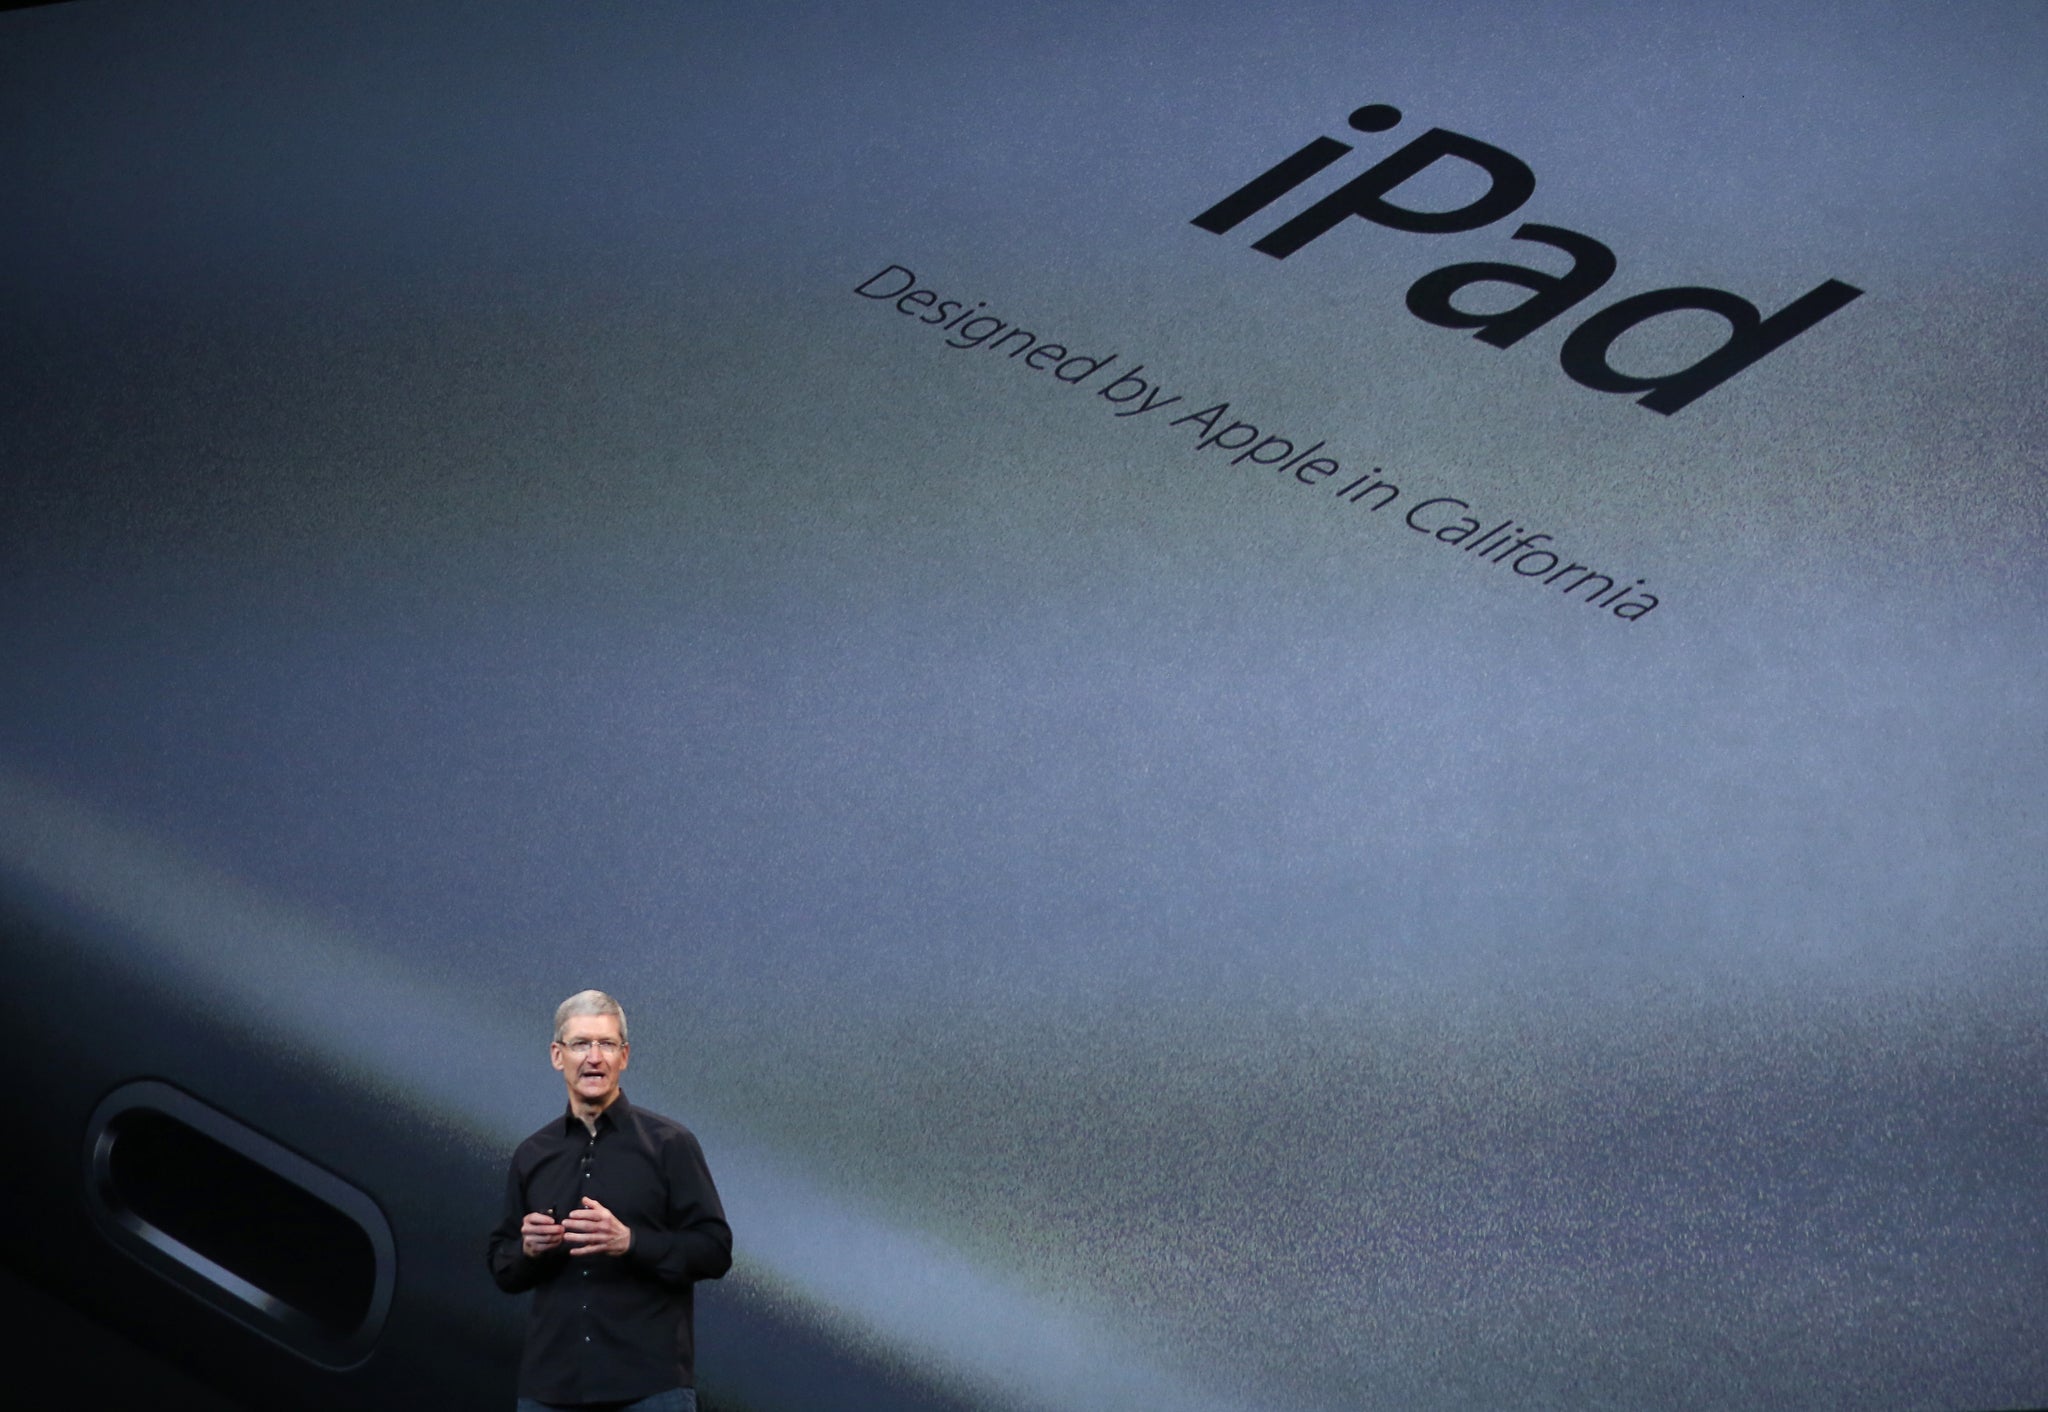 Apple Inc CEO Tim Cook speaks about the new iPad Air during an Apple event in San Francisco, California October 22, 2013.